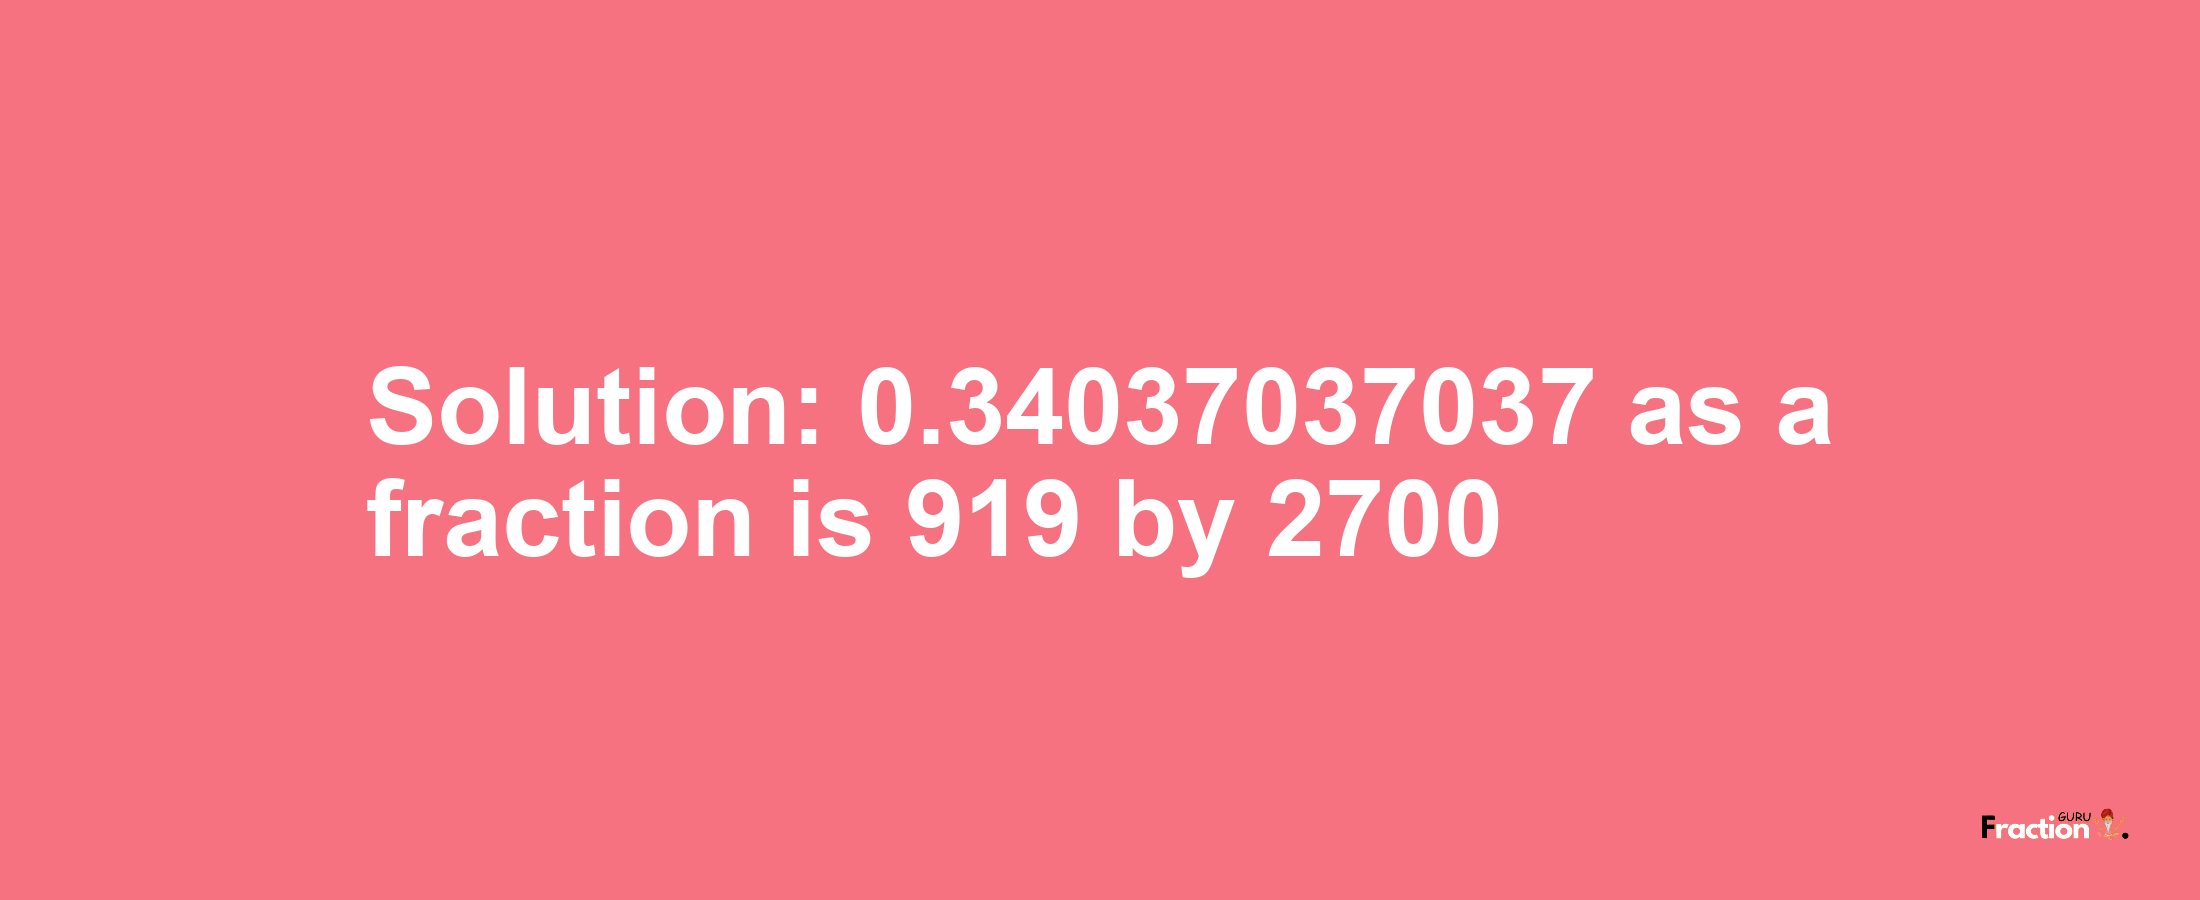 Solution:0.34037037037 as a fraction is 919/2700